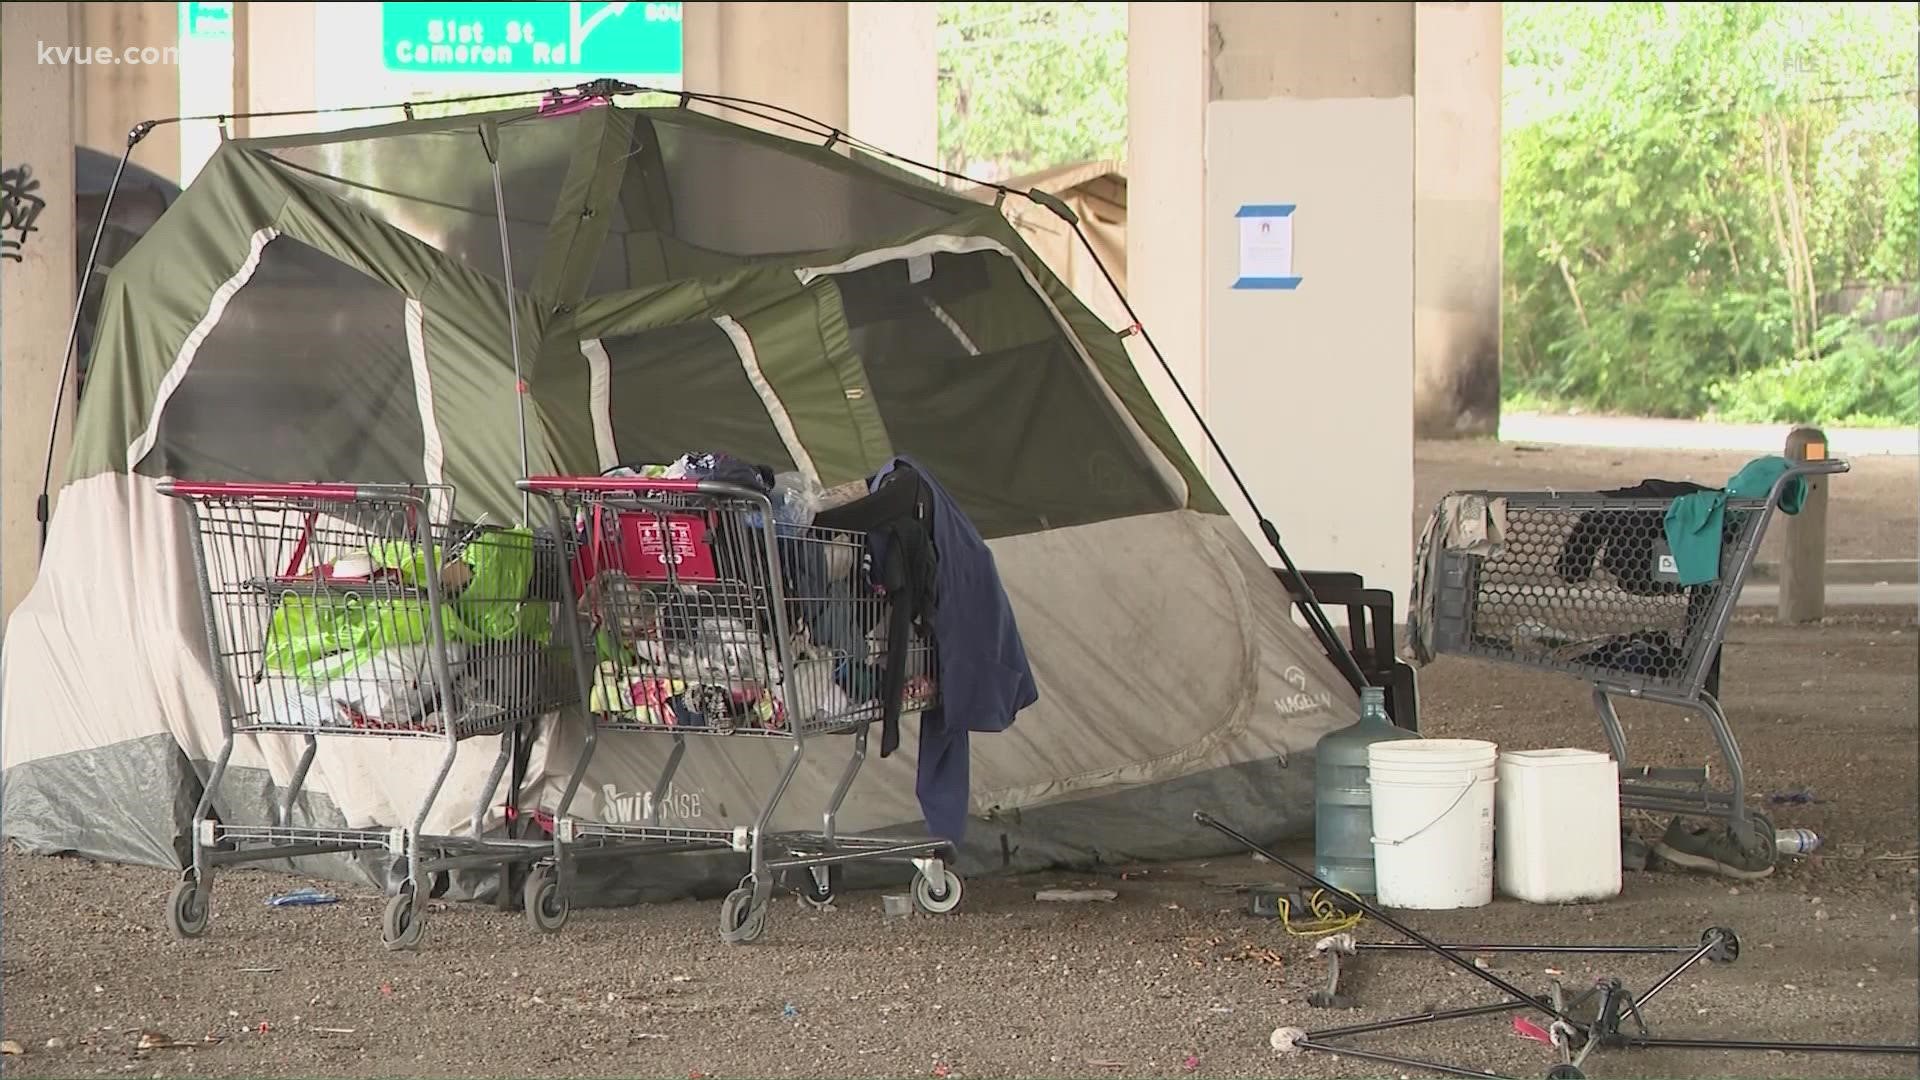 According to the latest data from the Downtown Austin Alliance, the number of people experiencing homelessness in the downtown district has dropped 55%.